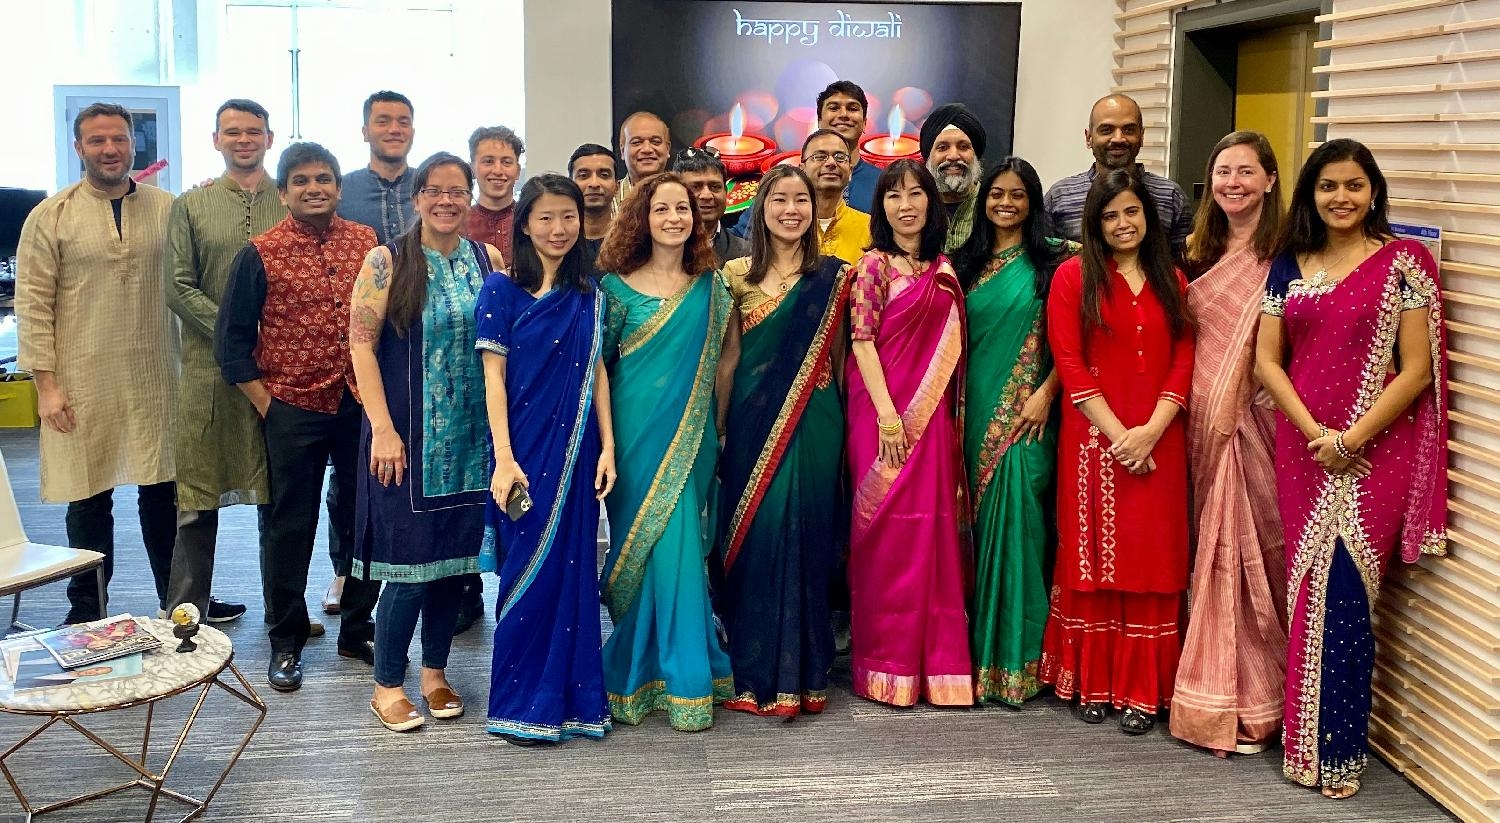 OUR ANNUAL DIWALI CELEBRATION IN OAKLAND!